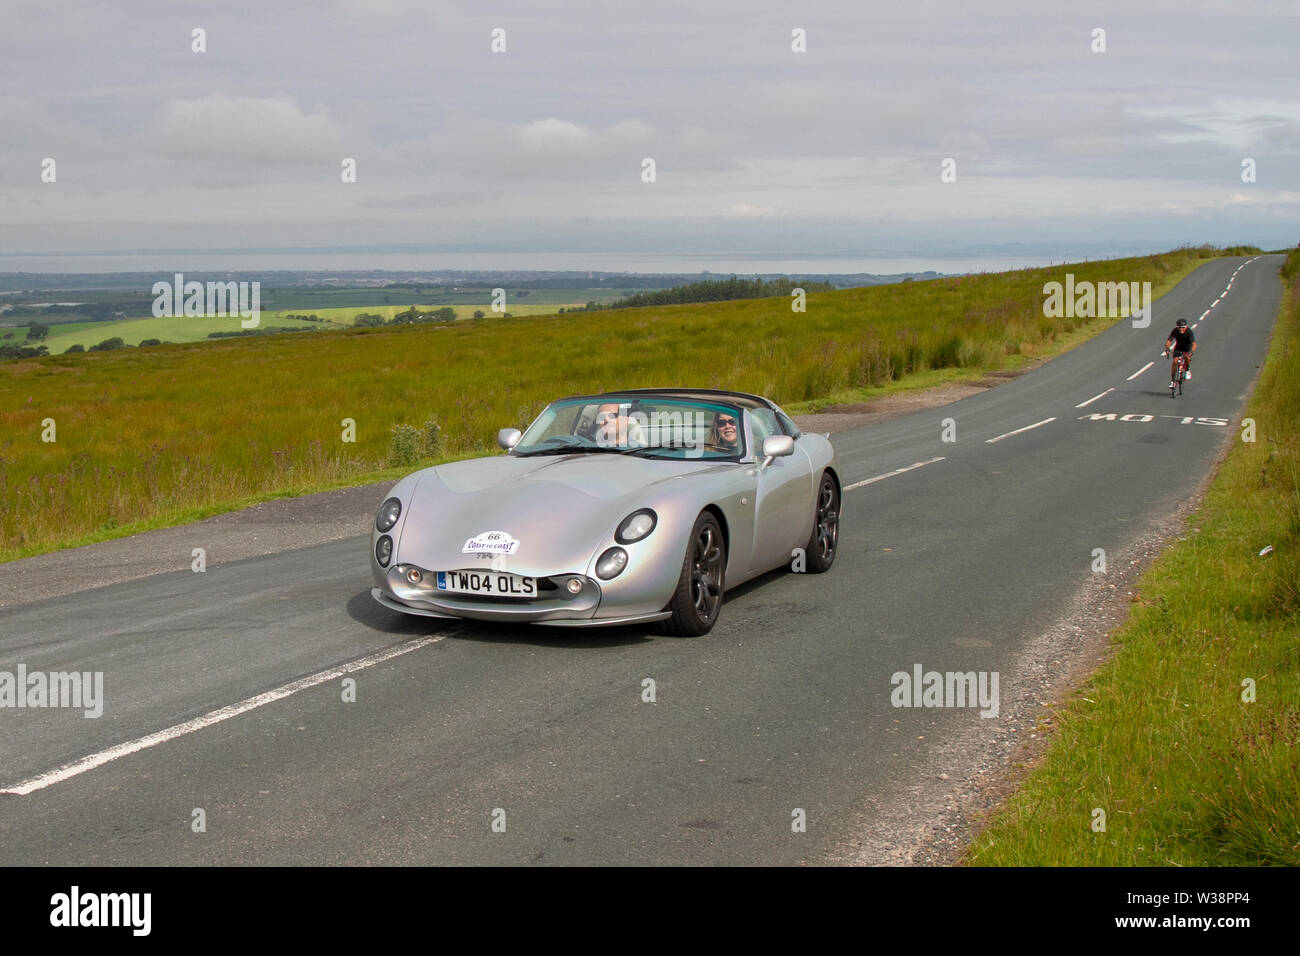 2004 Tvr Tuscan S Scorton, Lancashire. UK Weather 13th July, 2019. Sunny conditions as the Lancashire Car Club Rally Coast to Coast crosses the Trough of Bowland. 74 vintage, classic, collectible, heritage, historics vehicles left Morecambe heading for a cross county journey over the Lancashire landscape to Whitby. A 170 mile trek over undulating landscape as part of the classics on tour car club annual event. Stock Photo